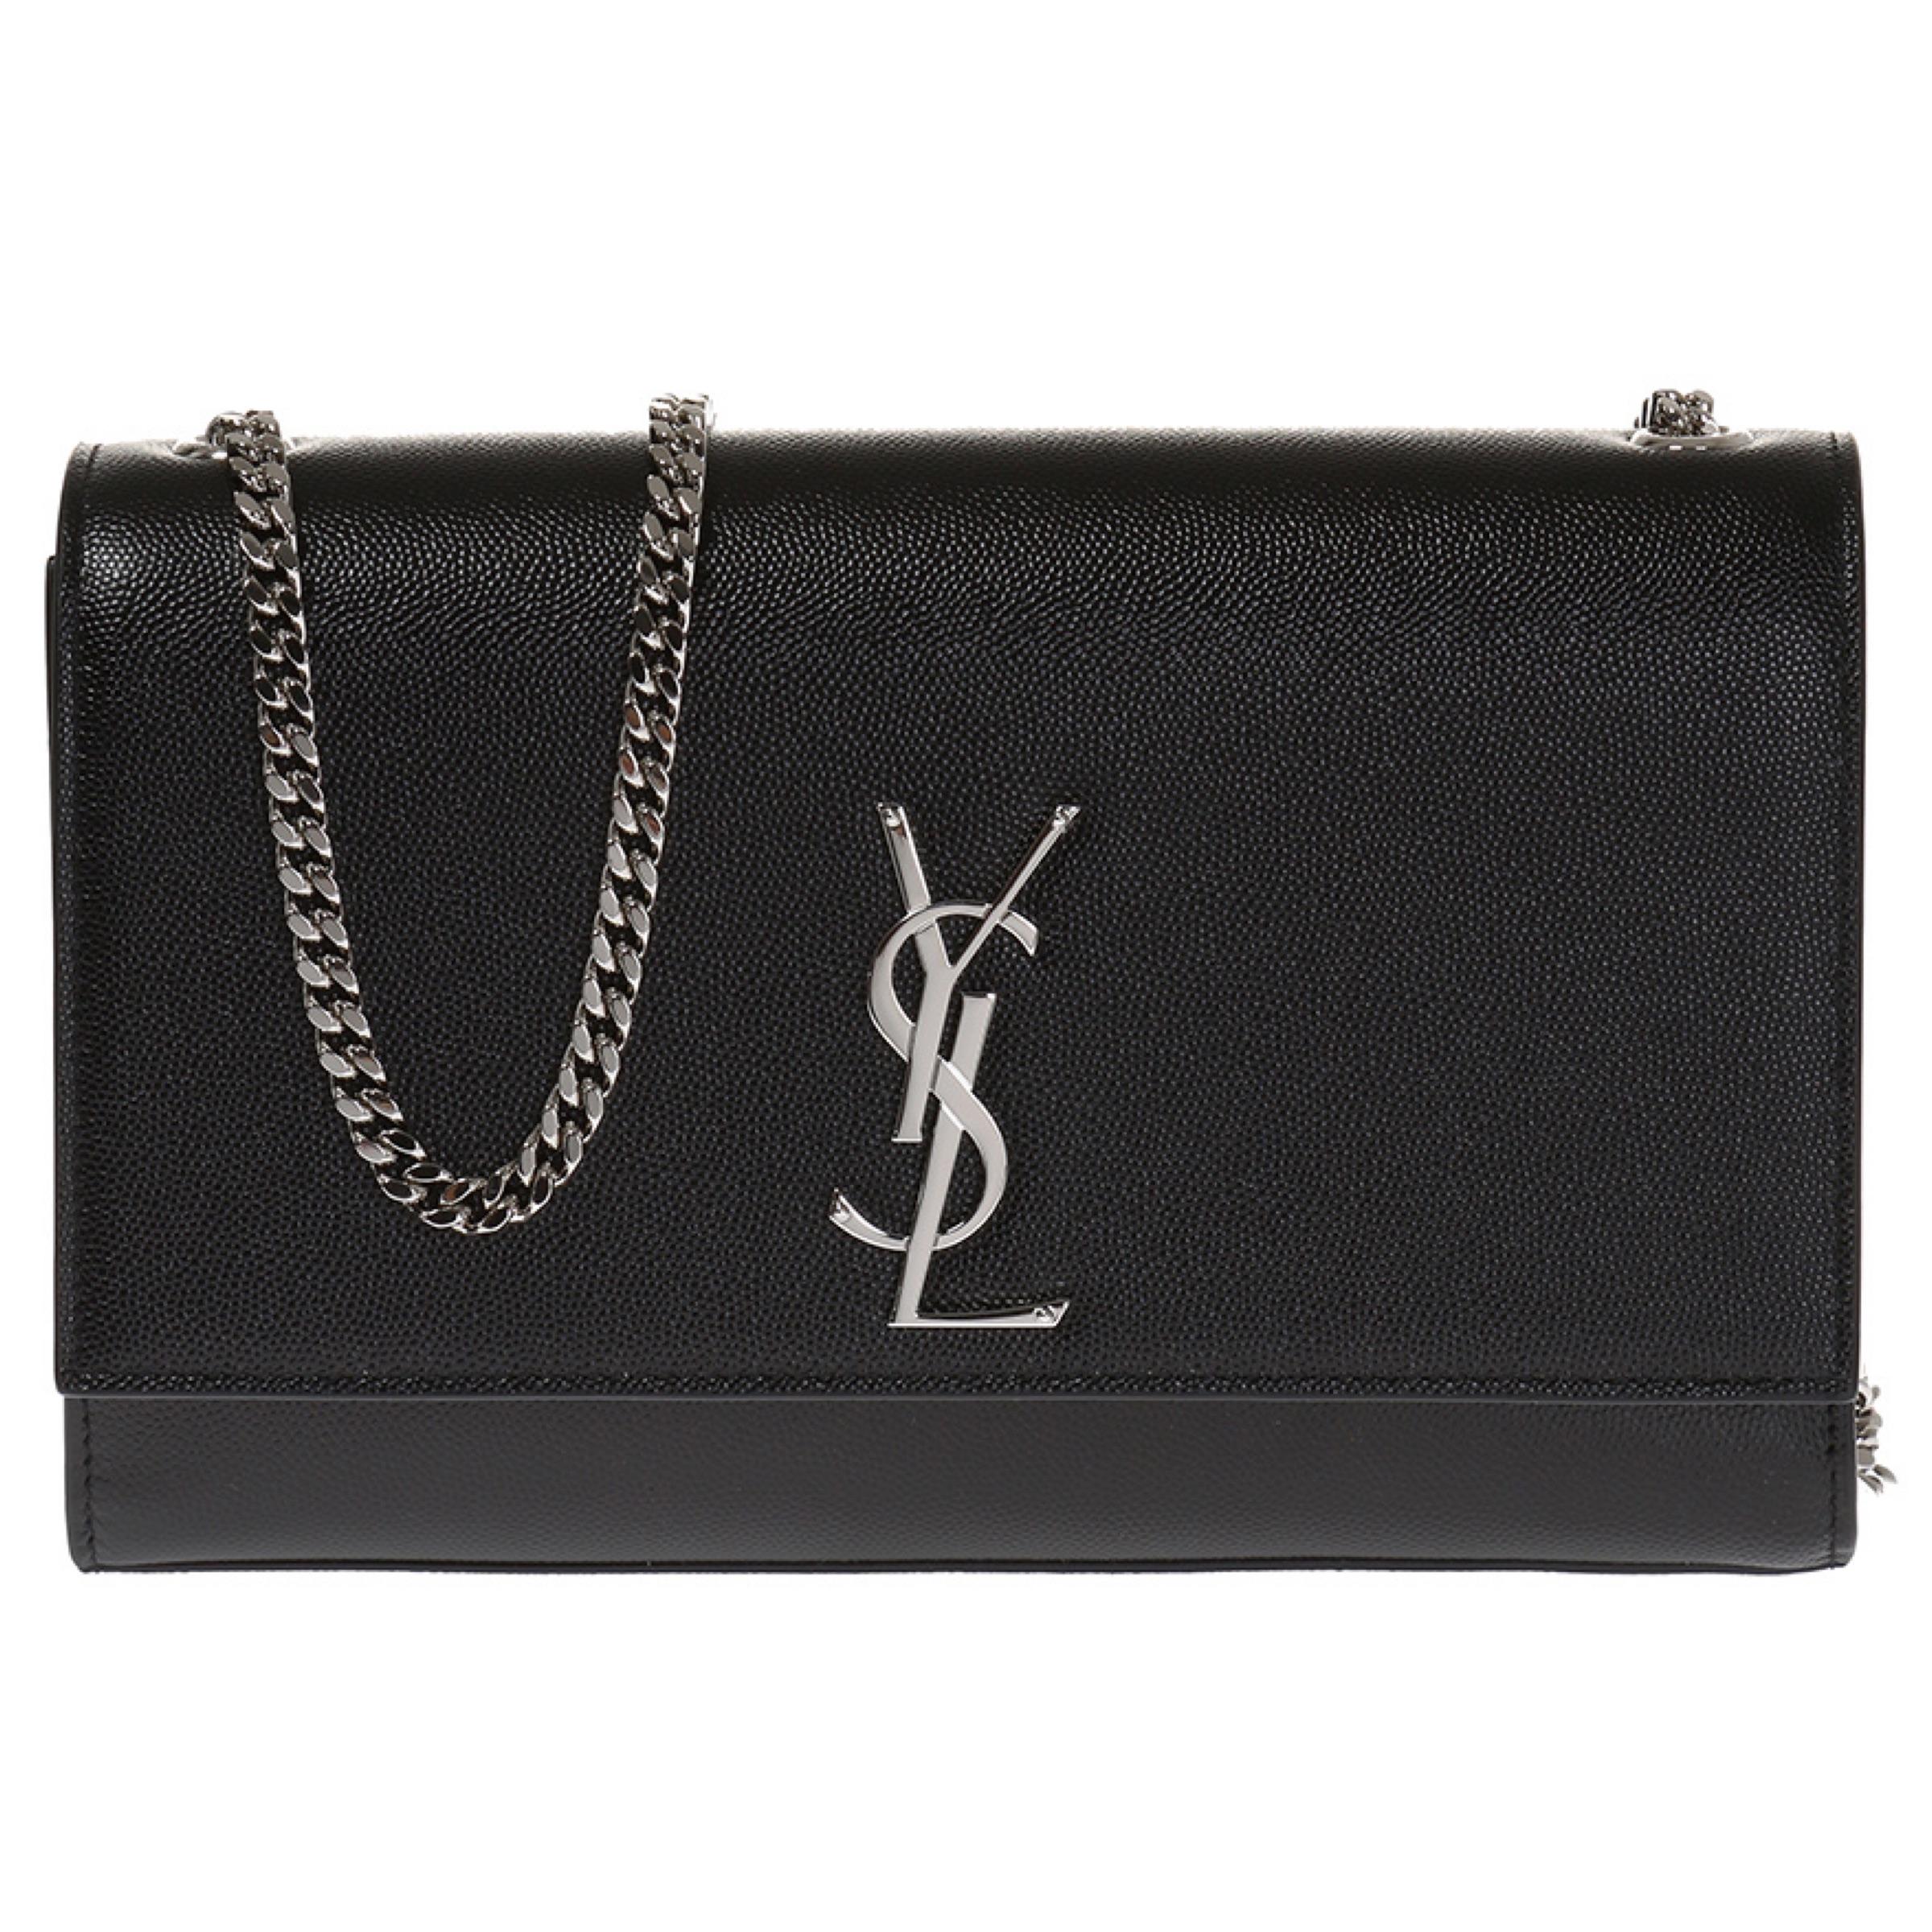 New Saint Laurent Black Kate Medium Chain Leather Crossbody Shoulder Bag

Authenticity Guaranteed

DETAILS
Brand: Saint Laurent
Condition: Brand new
Gender: Women
Category: Crossbody bag
Color: Black
Material: Leather
Front YSL logo
Silver-tone